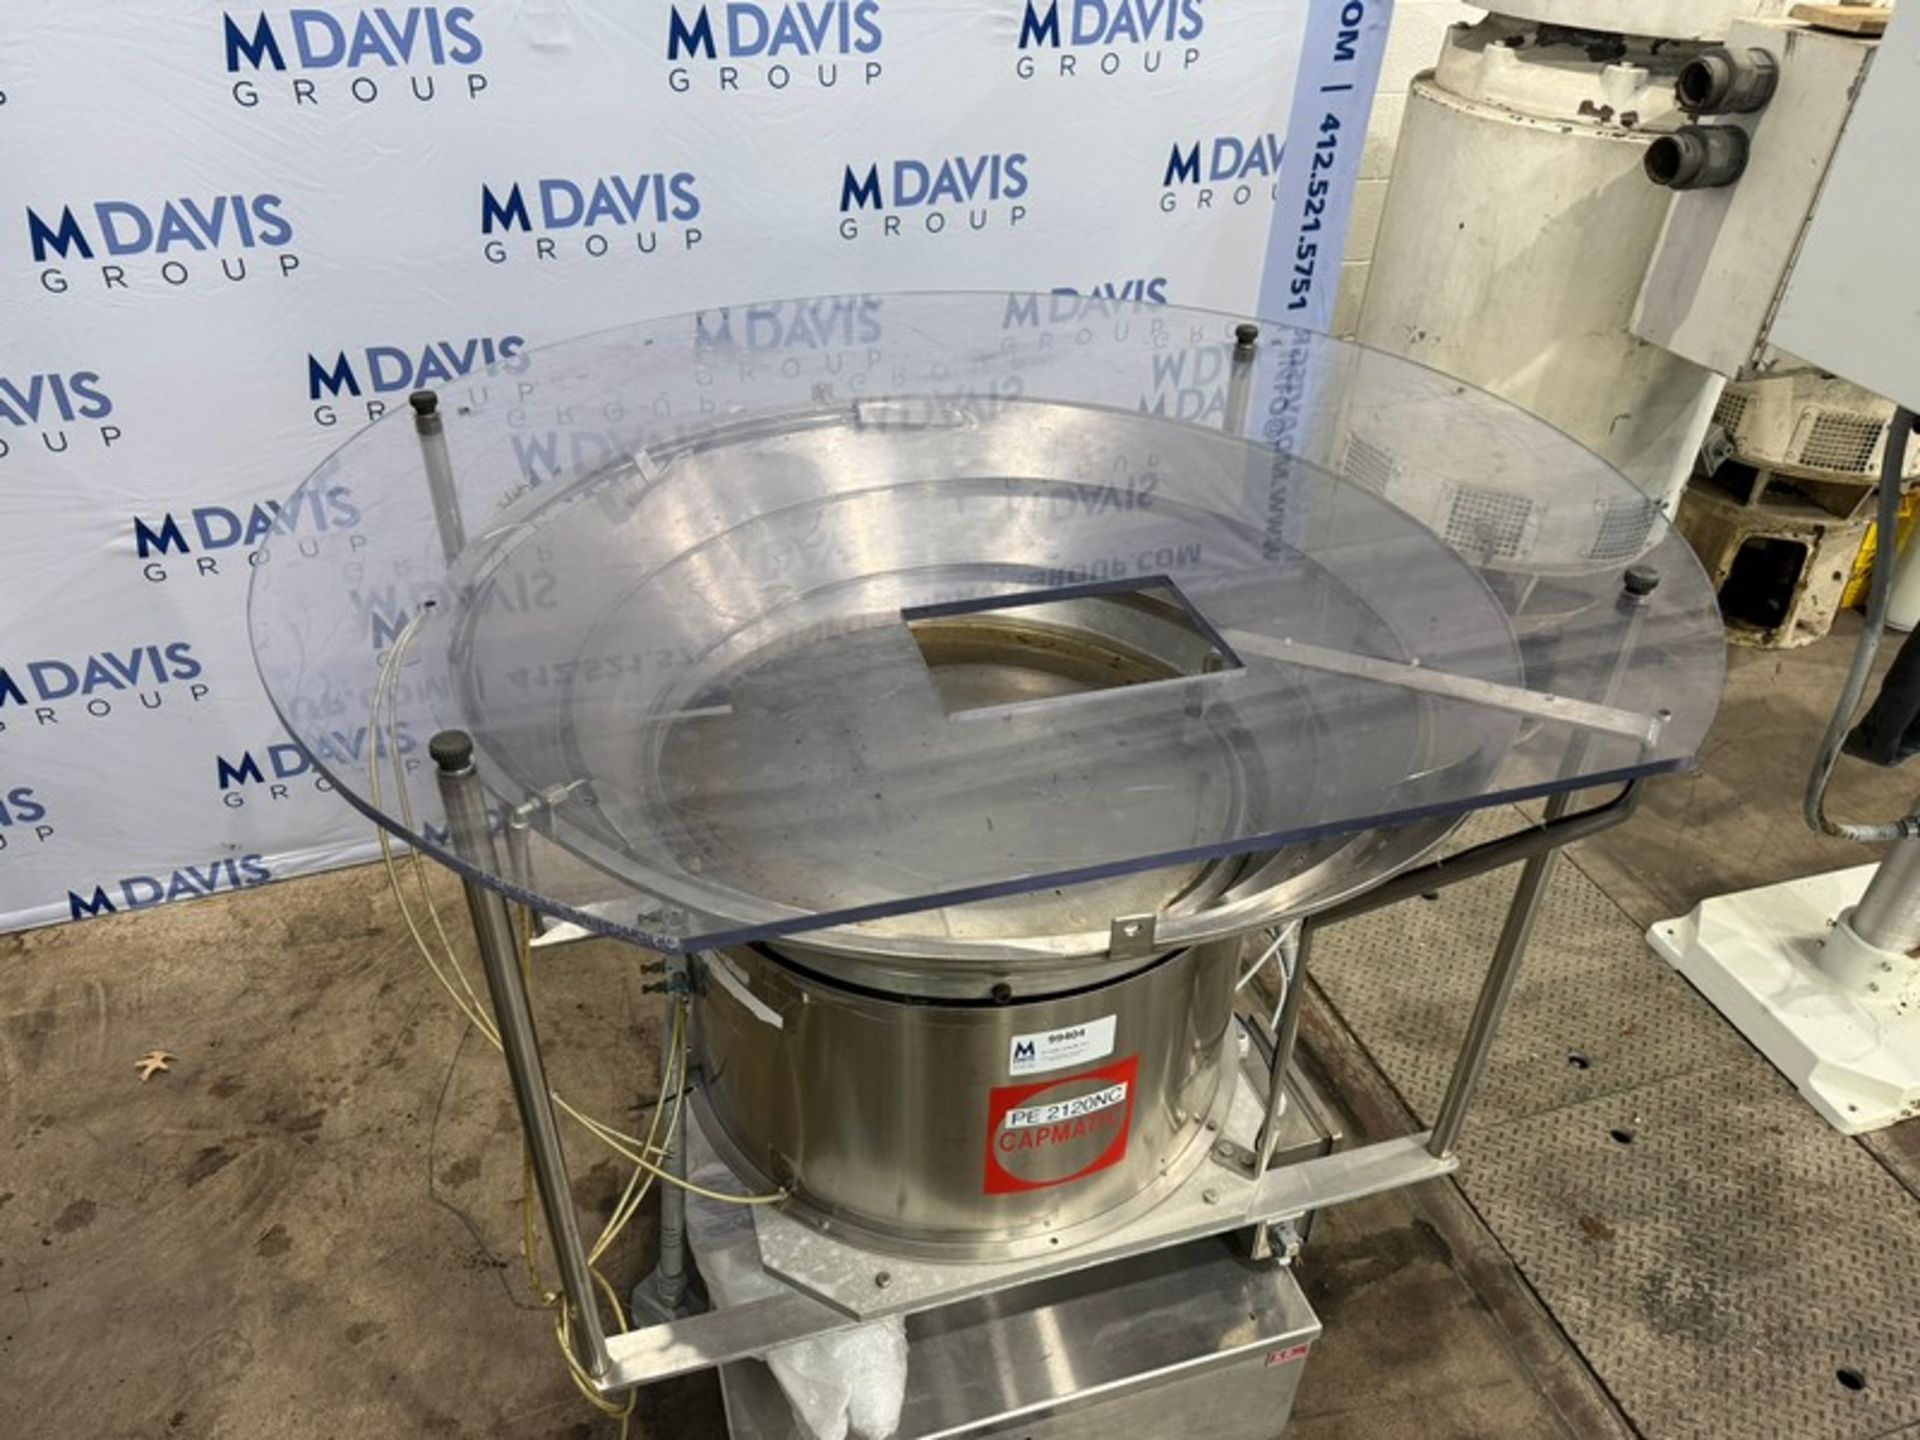 Capmatic S/S Vibratory Hopper, Mounted on S/S Frame (INV#99404) (Located @ the MDG Auction - Image 3 of 8